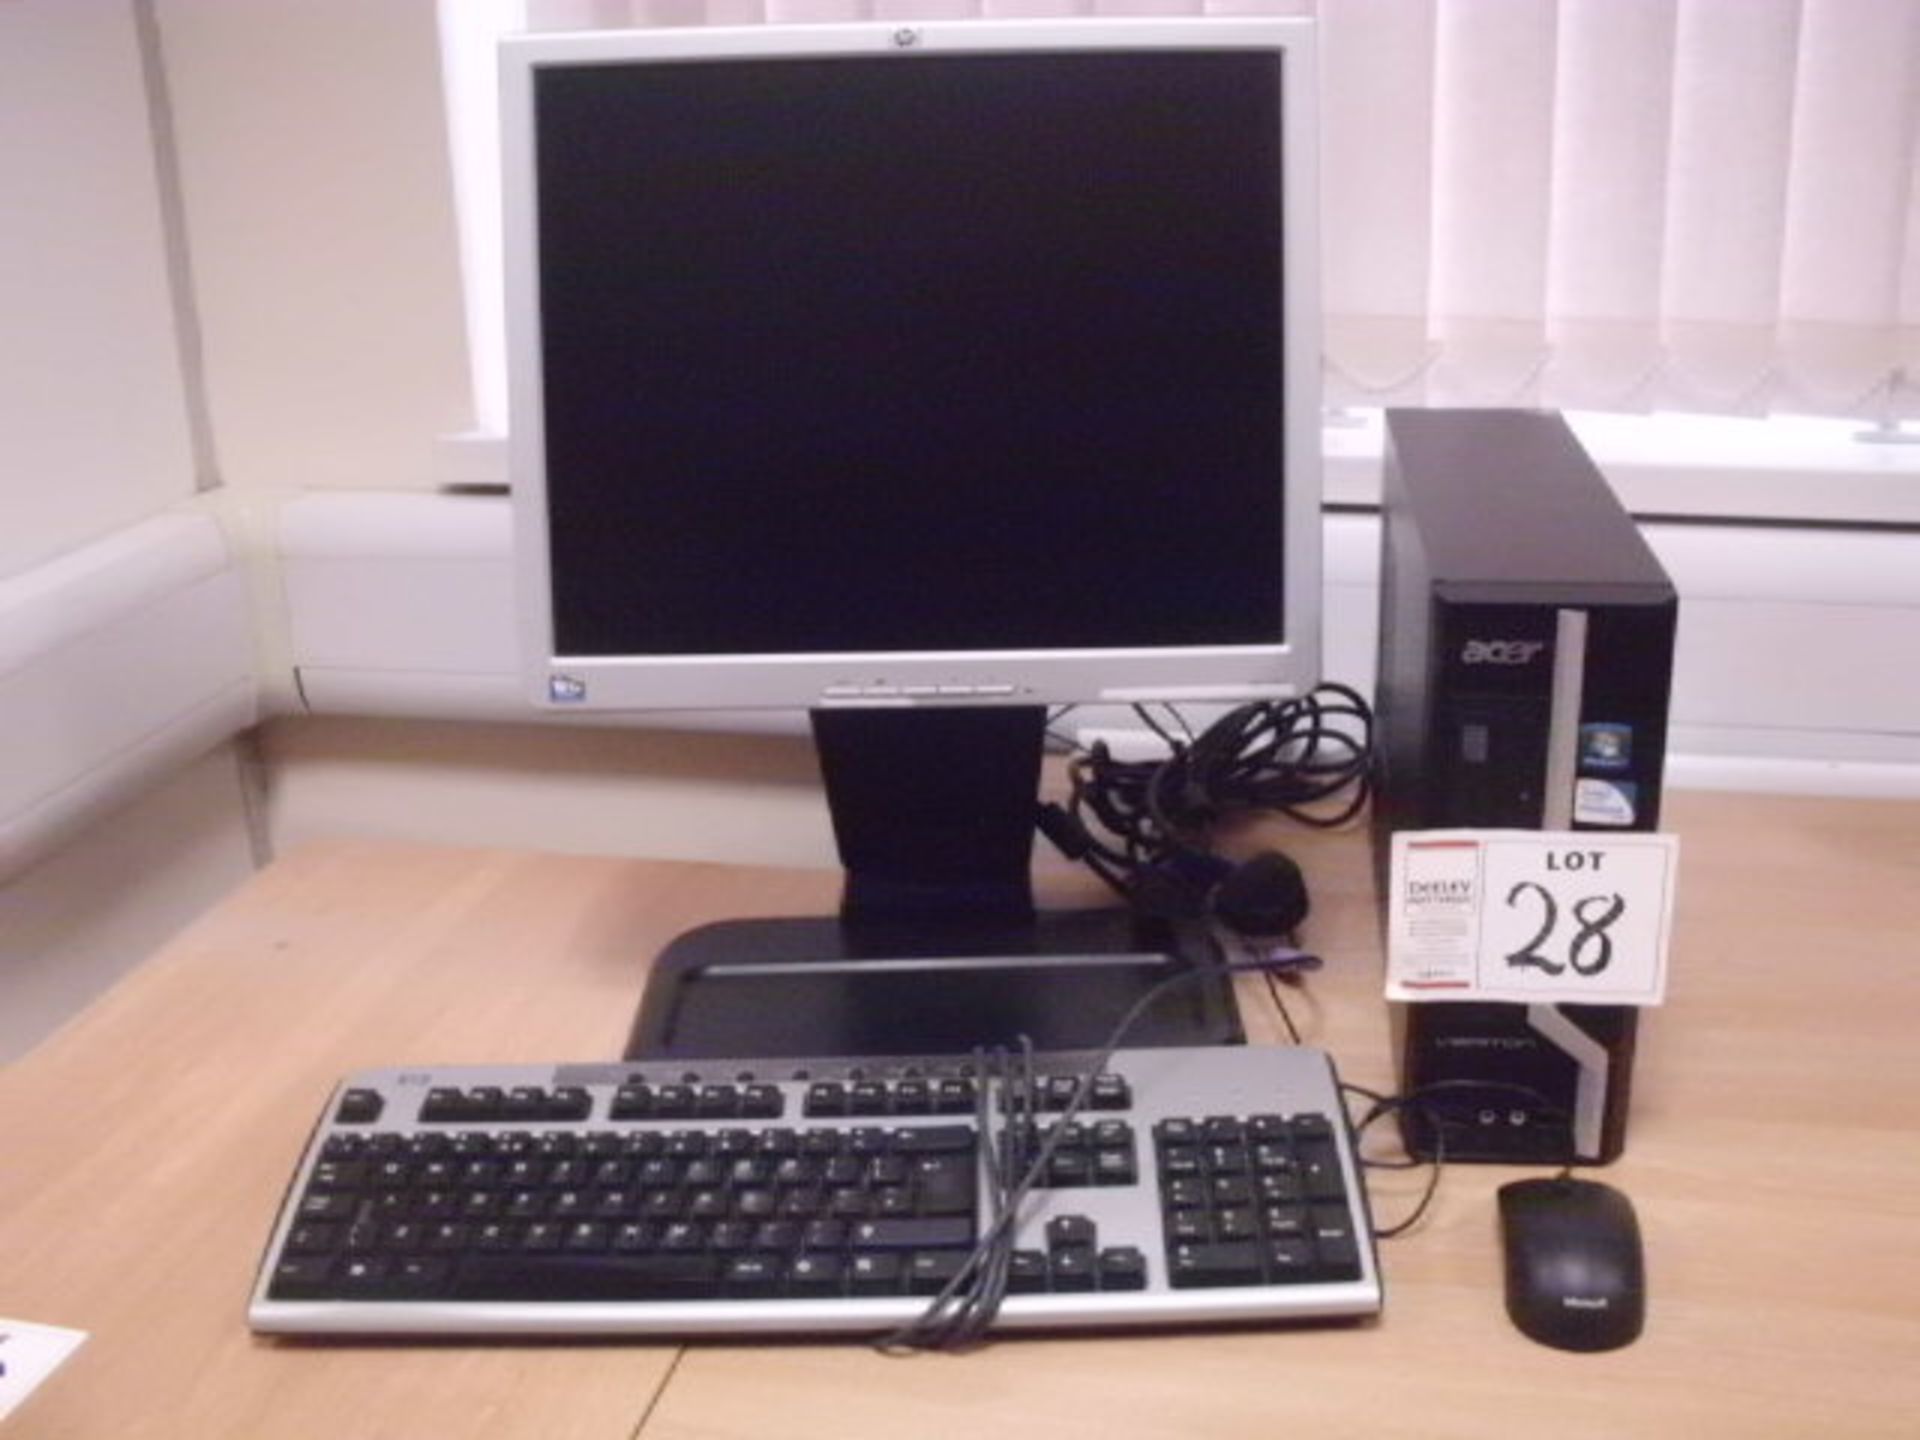 Acer X480G PERSONAL COMPUTER with 17" flat screen monitor, keyboard and mouse